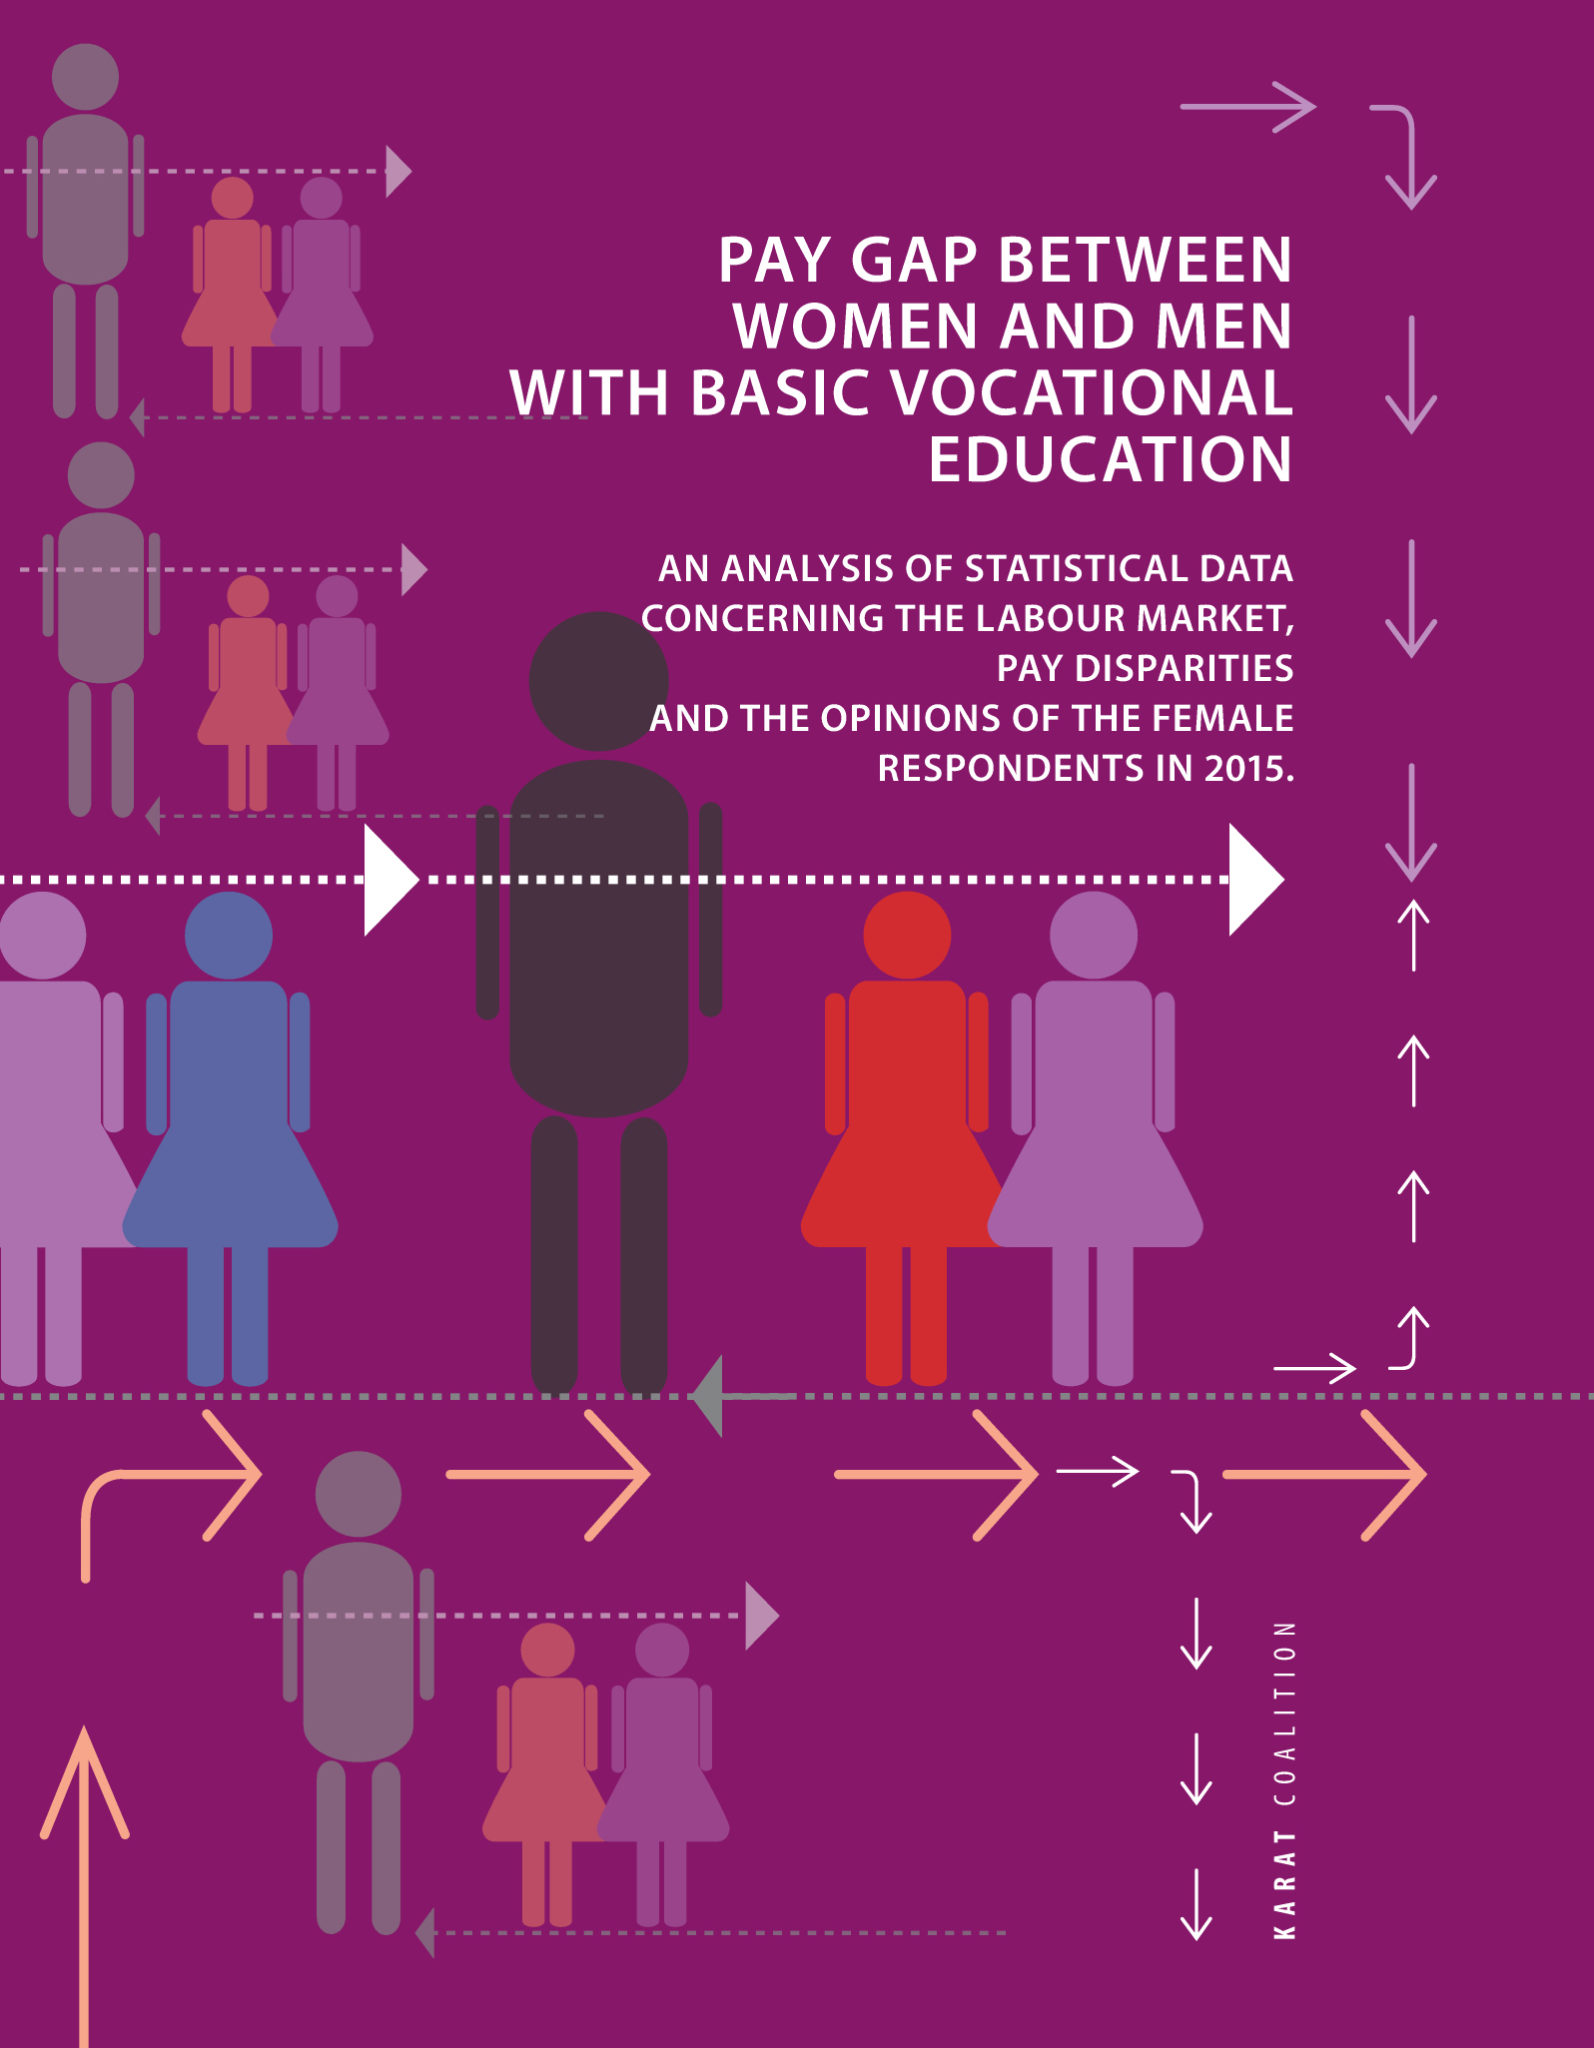 Report: Pay gap between women and men with basic vocational education